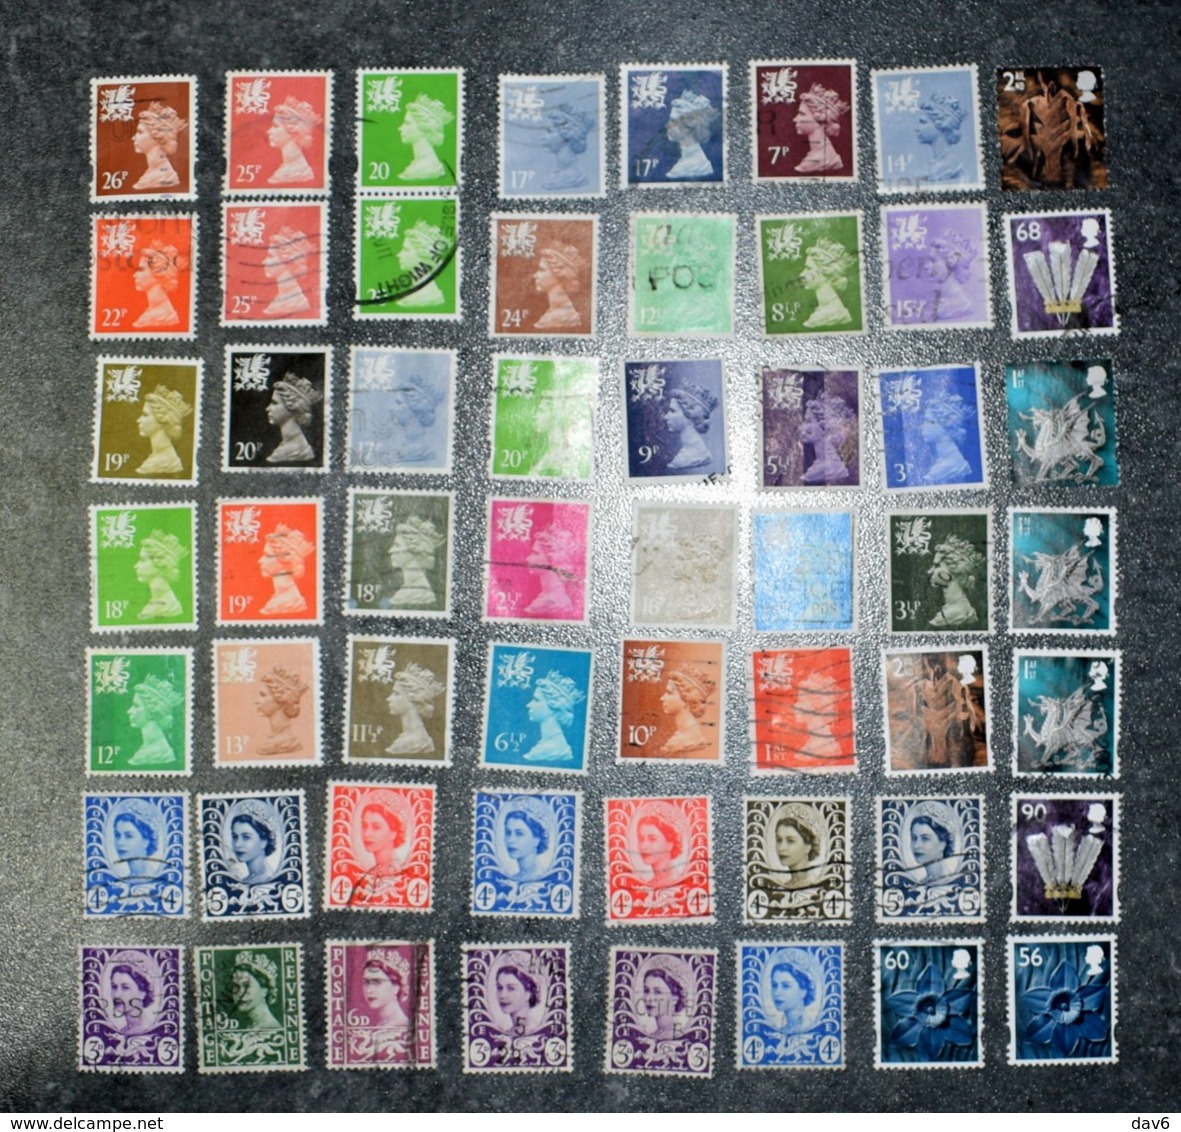 GB STAMPS   WALES  DEFINITIVES   1  ~~L@@K~~ - Galles